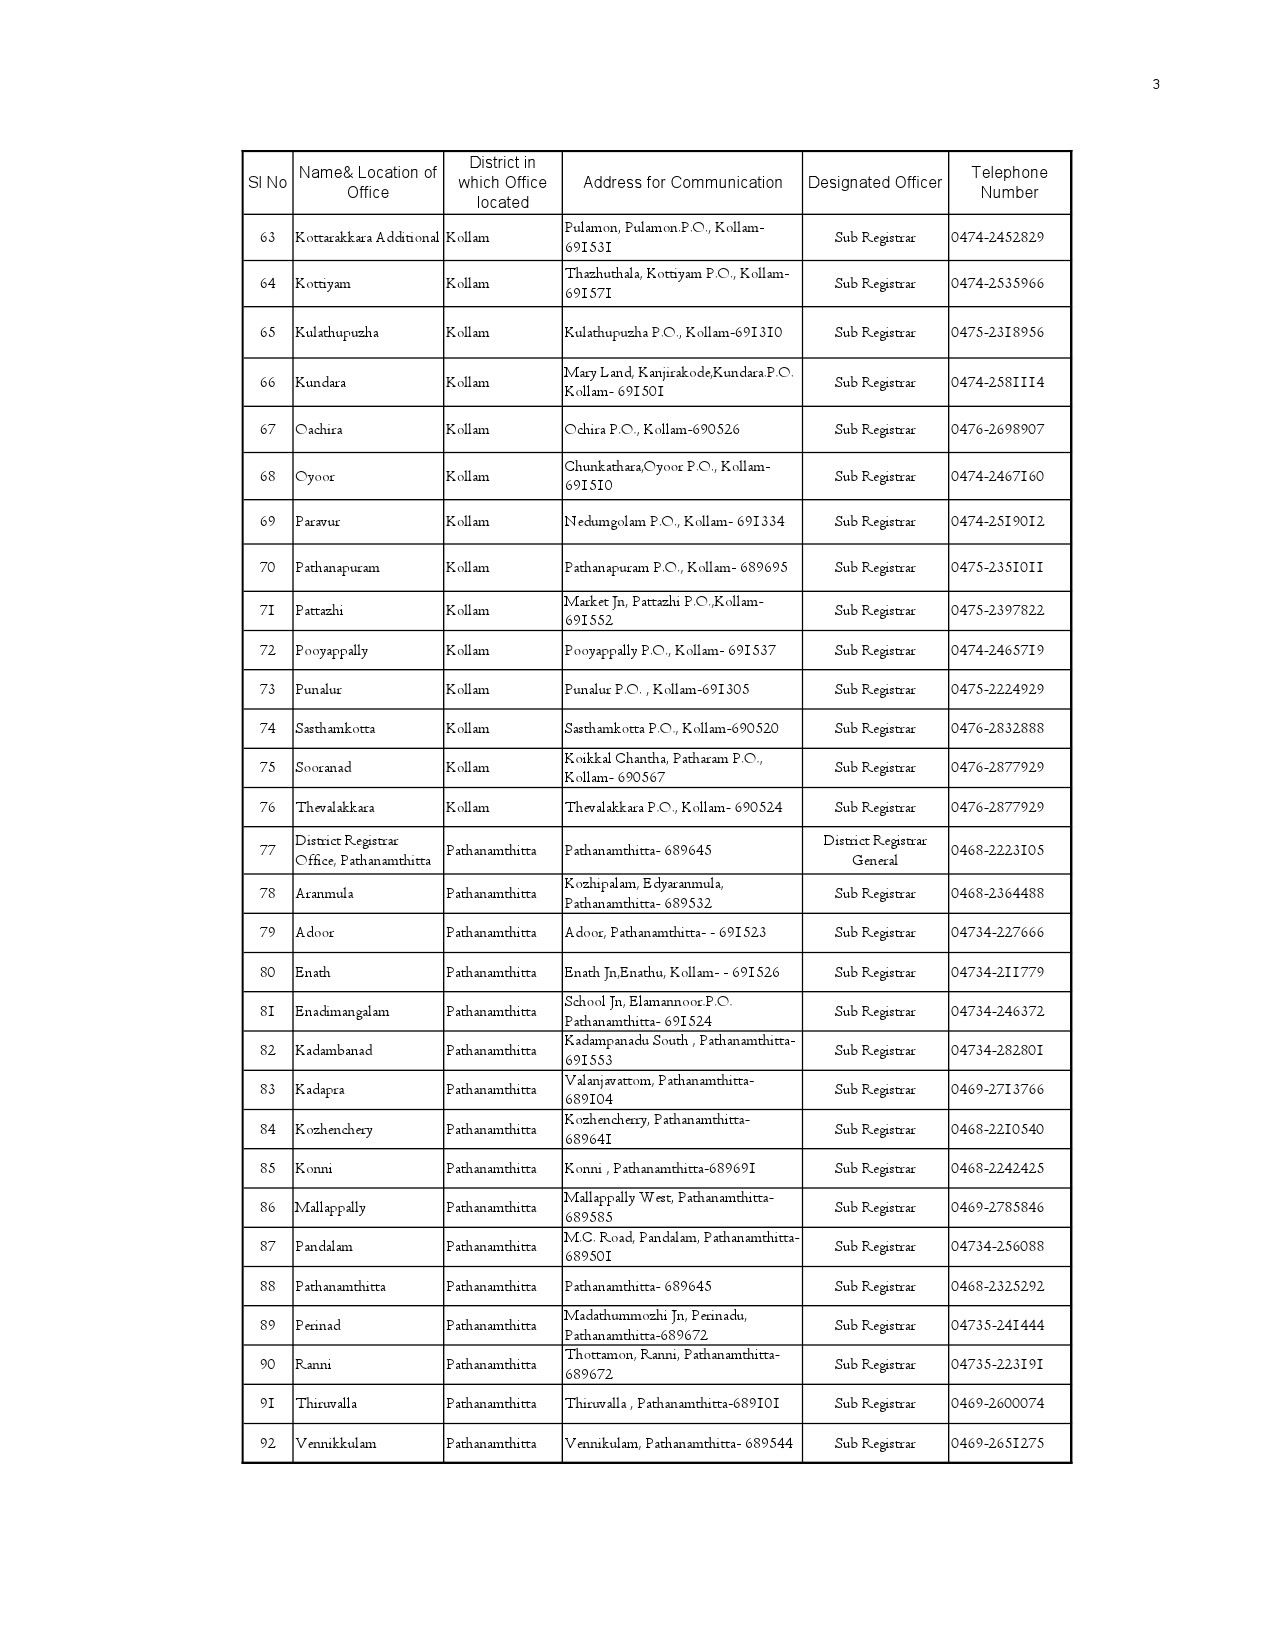 List of Offices in Kerala under the Department of Registration - Notification Image 3